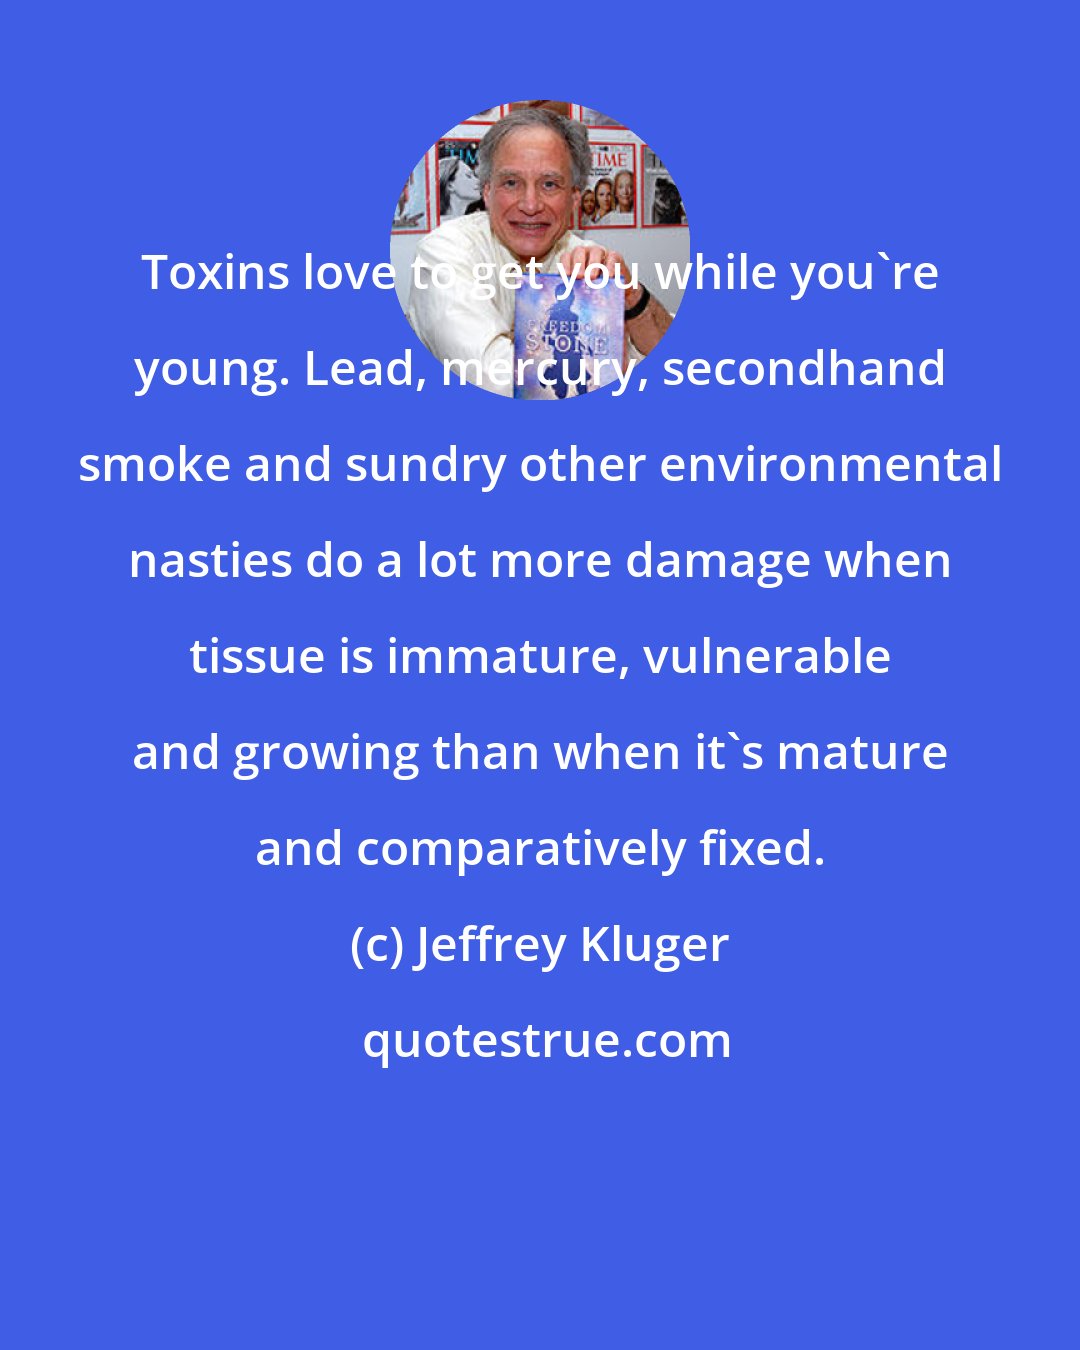 Jeffrey Kluger: Toxins love to get you while you're young. Lead, mercury, secondhand smoke and sundry other environmental nasties do a lot more damage when tissue is immature, vulnerable and growing than when it's mature and comparatively fixed.